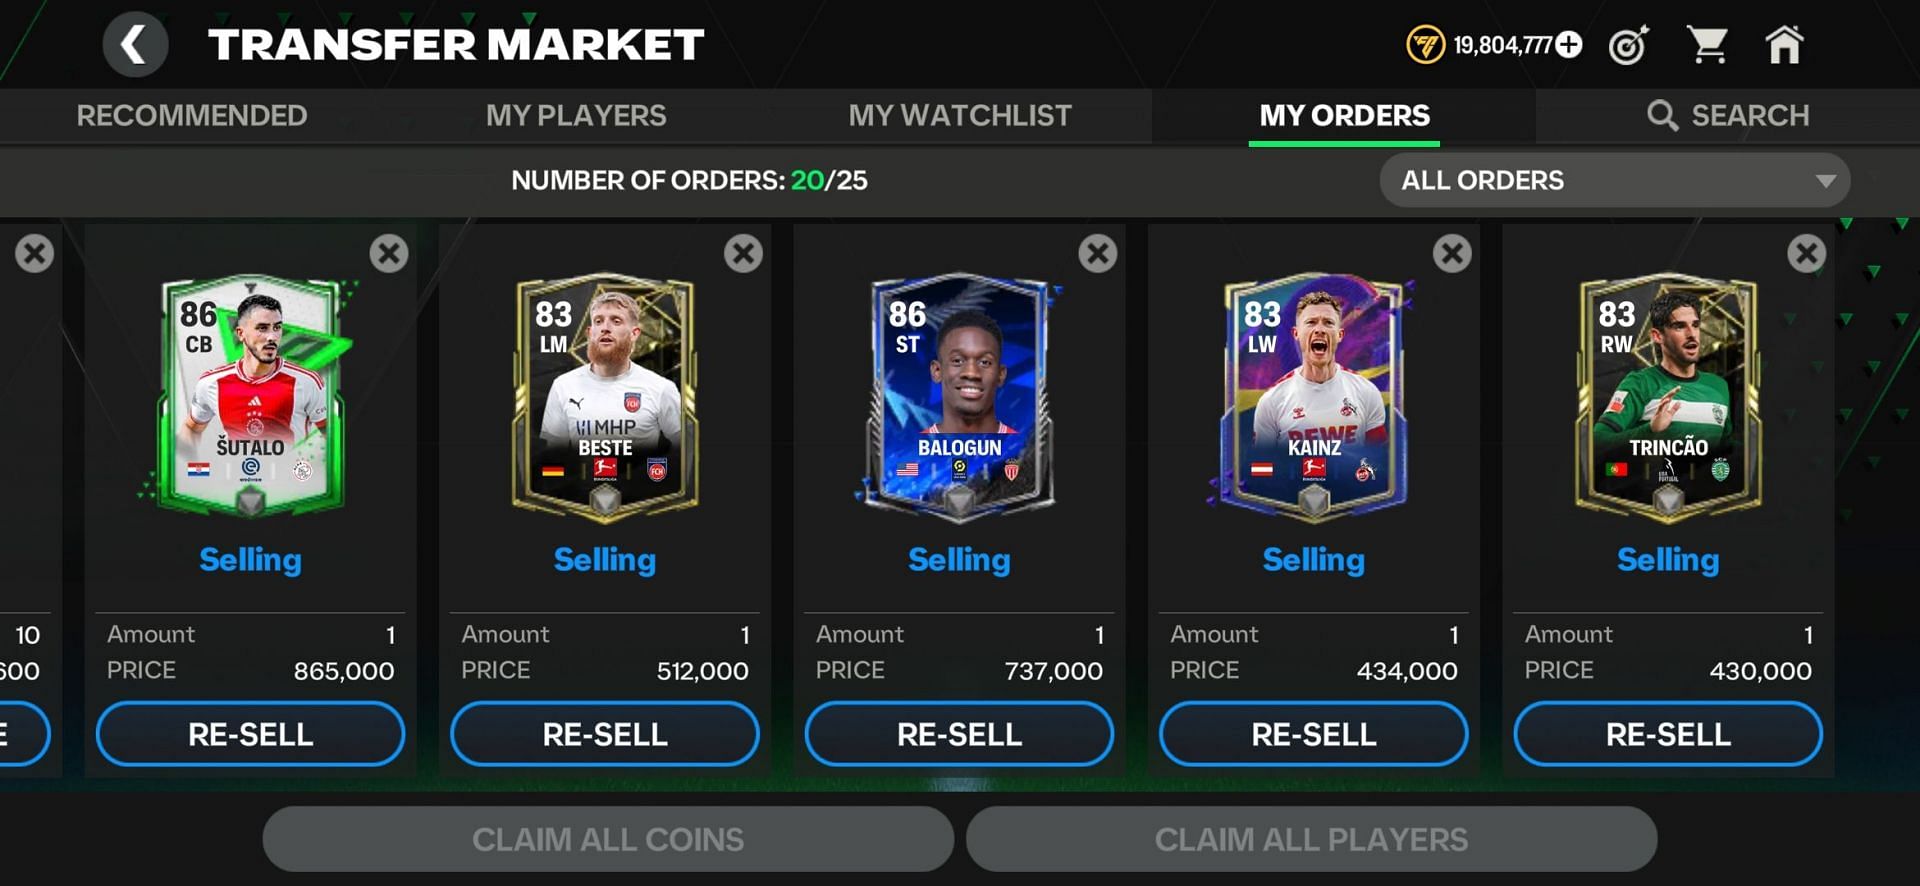 The 80+ players must be sold at 400k or higher (Image via EA Sports)